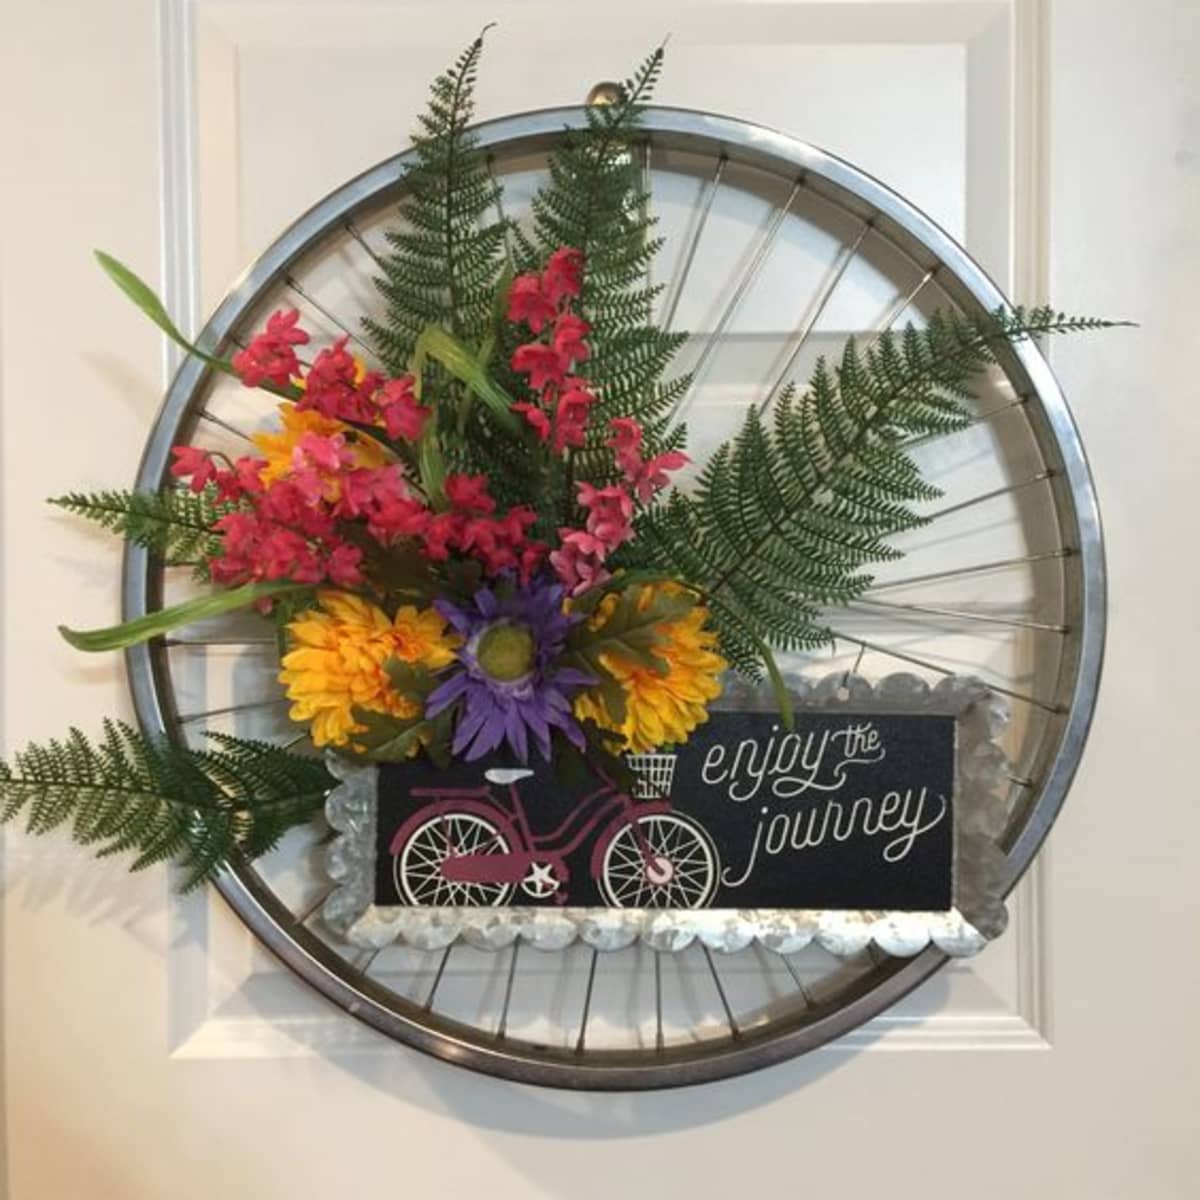 40+ Bicycle Wheel Wreath Ideas That Look Absolutely Stunning - FeltMagnet